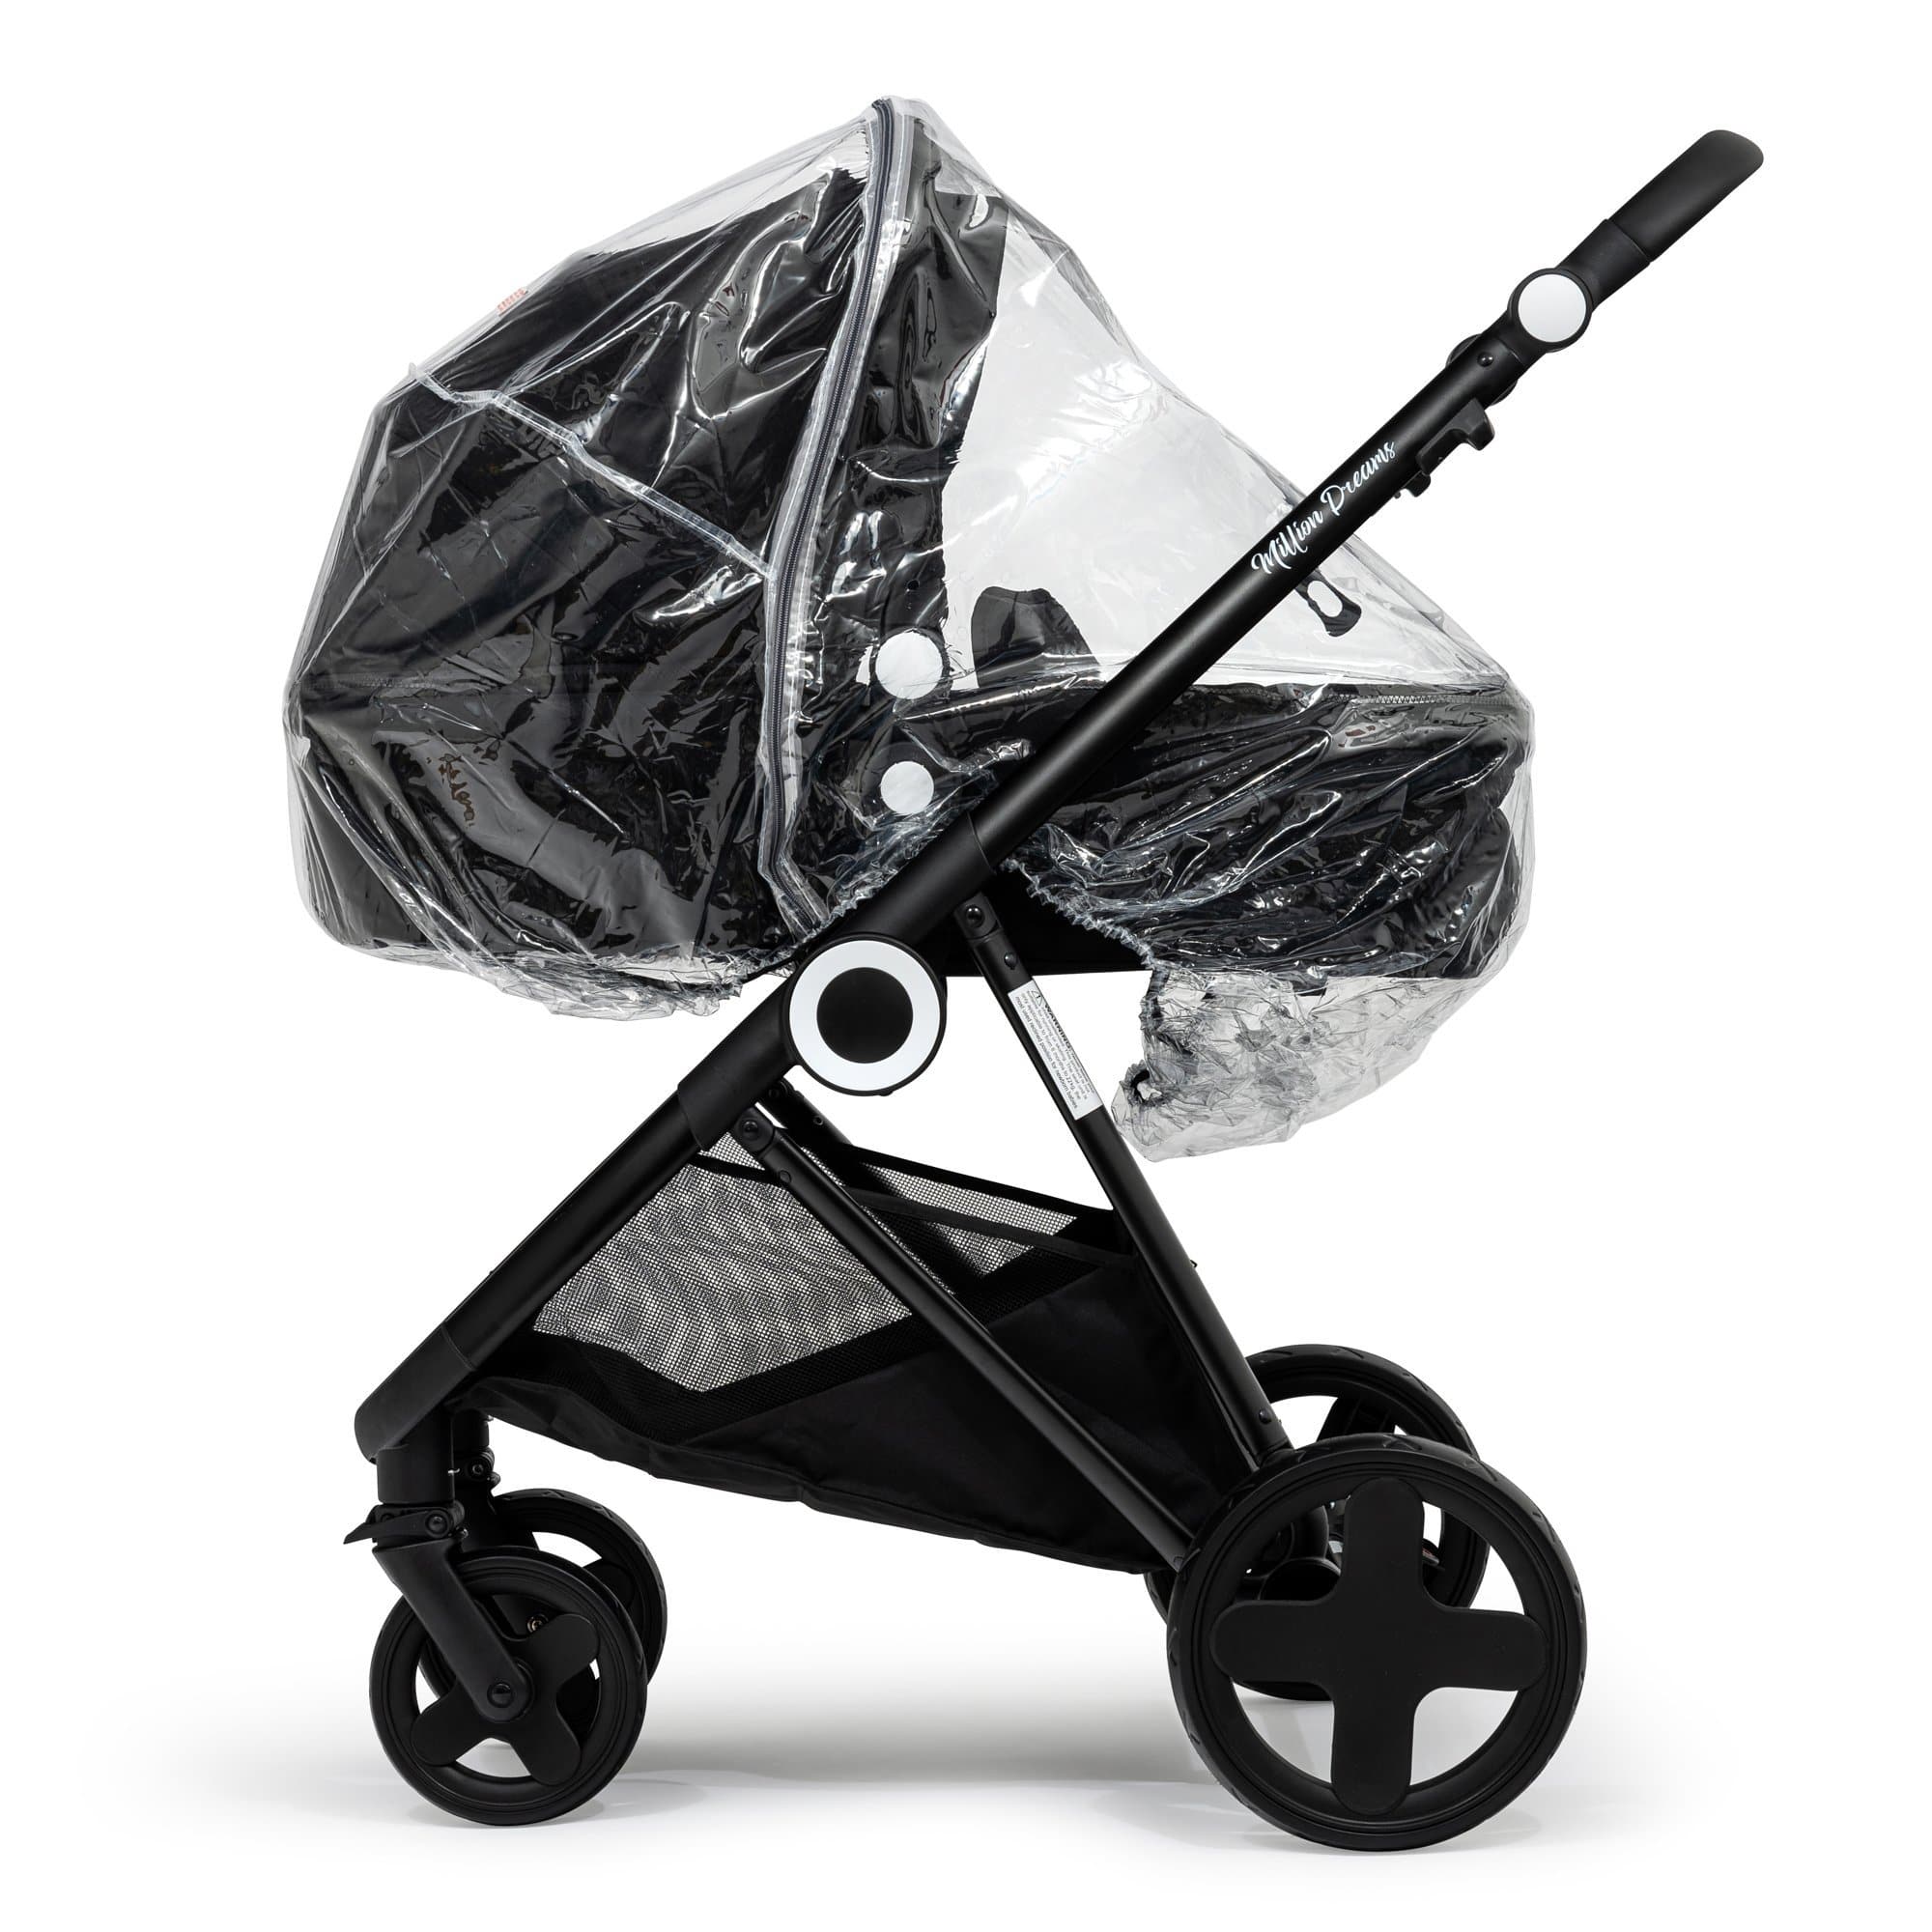 2 in 1 Rain Cover Compatible with Infababy - Fits All Models - For Your Little One